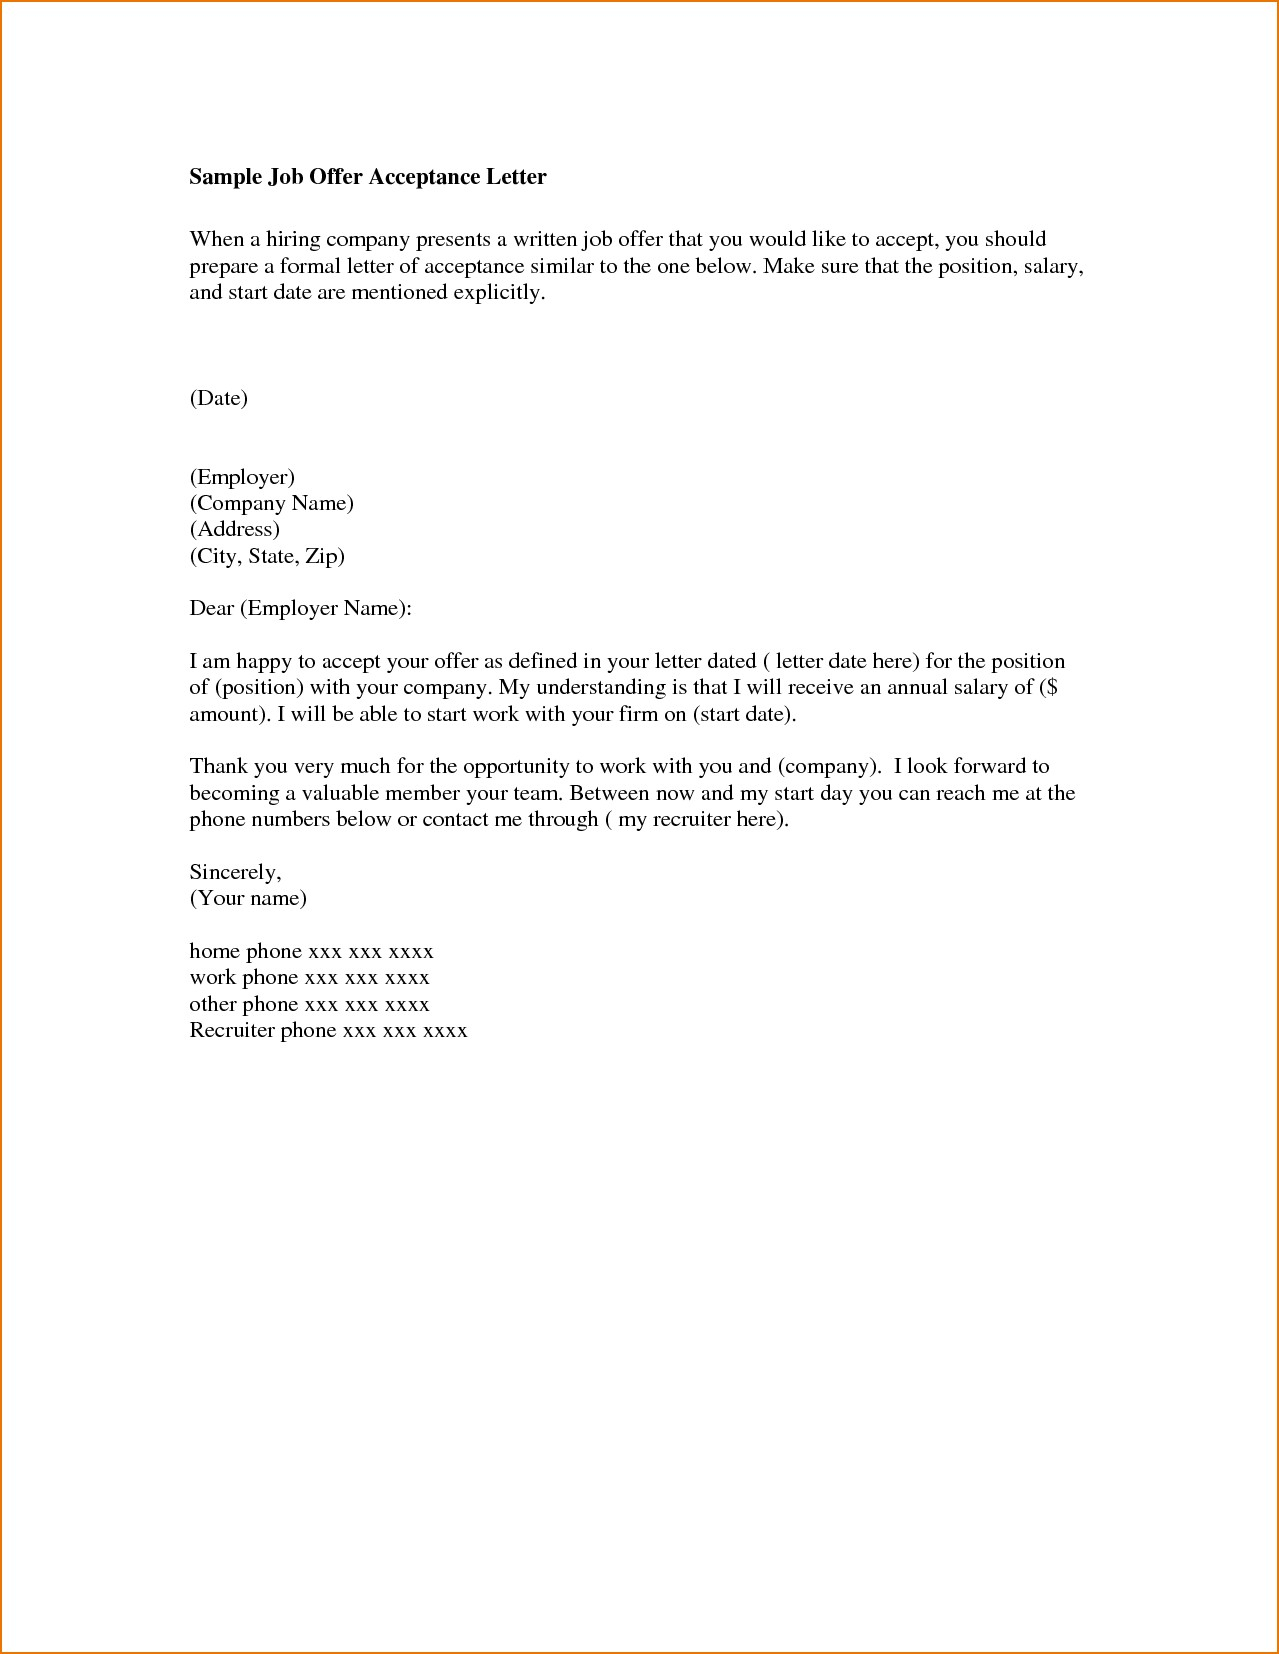 Official Job Offer Letter Template - Job Fer Acceptance Letter Example Inspirationa How to Write A